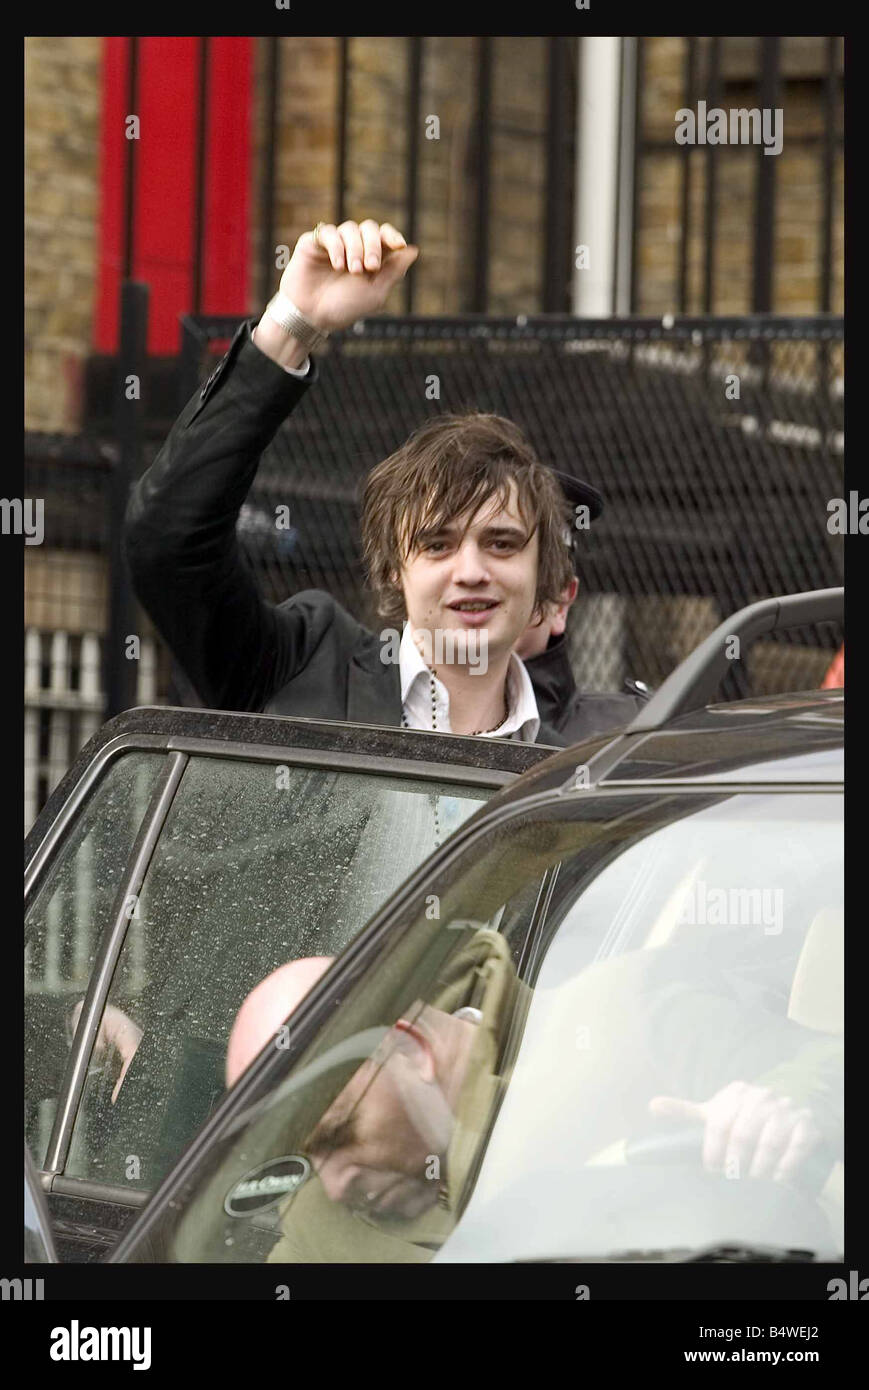 Babyshambles singer Pete Doherty has been given a 12 month community order after admitting possession of drugs The 26 year old was sentenced at Ealing Magistrates Court Stock Photo